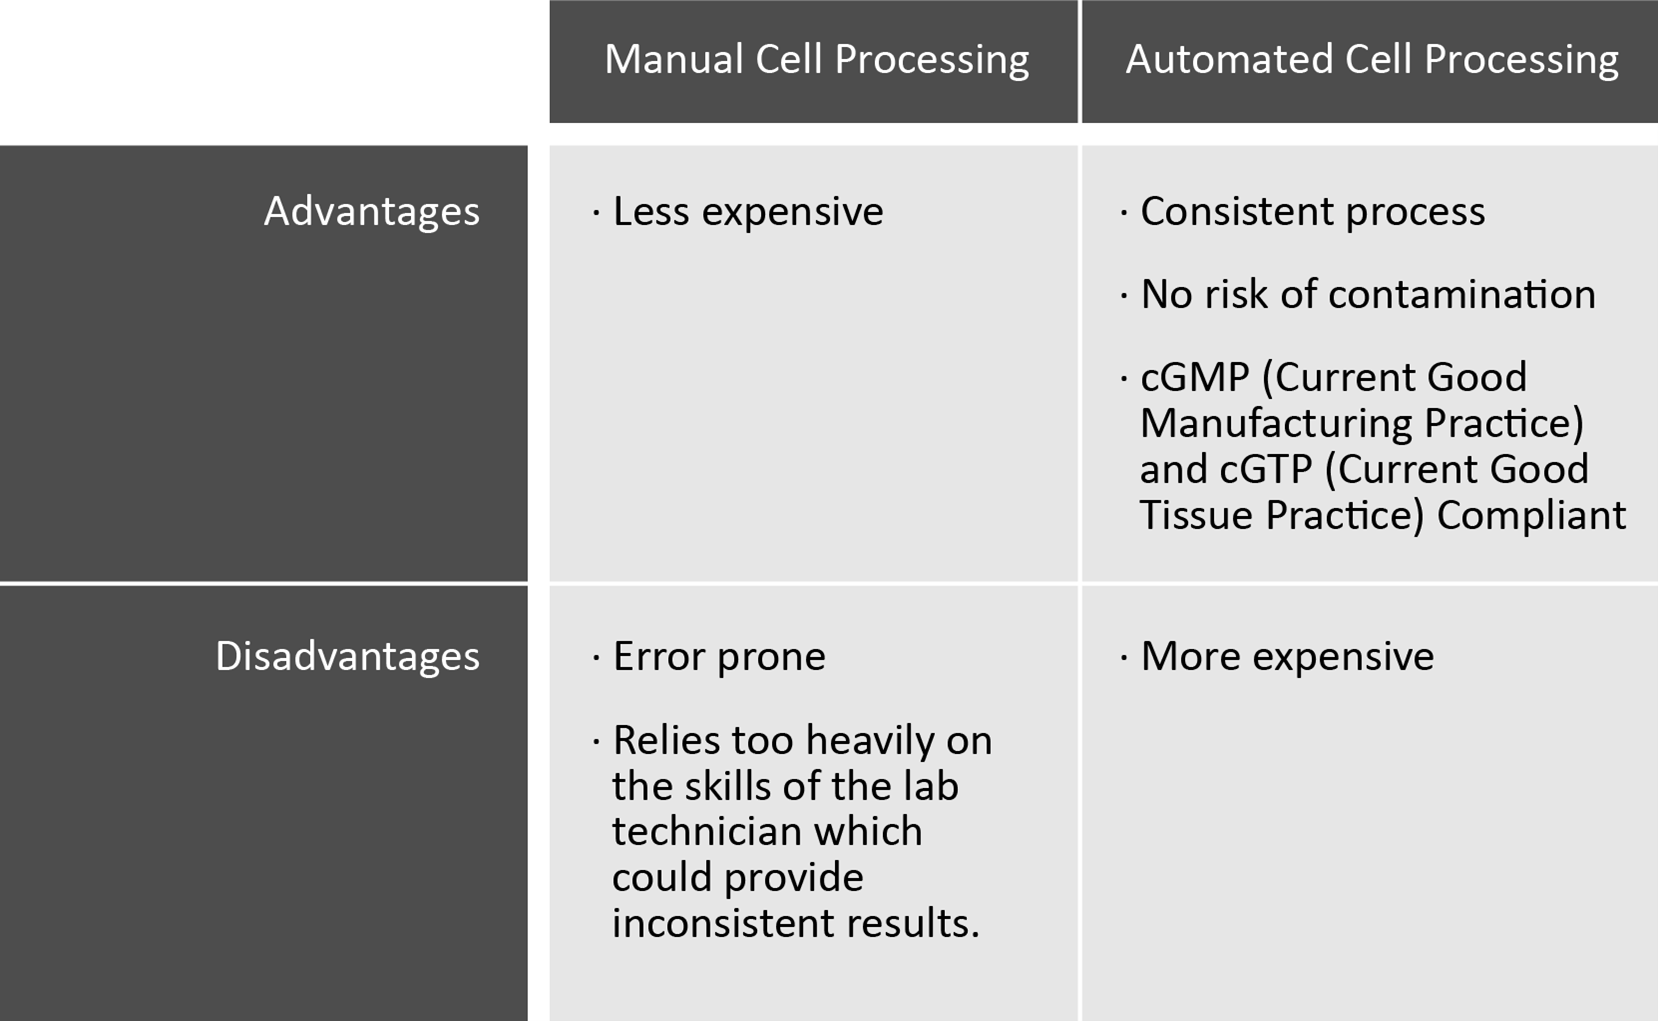 Cord Blood Manual Cell Processing vs Automated Cell Processing